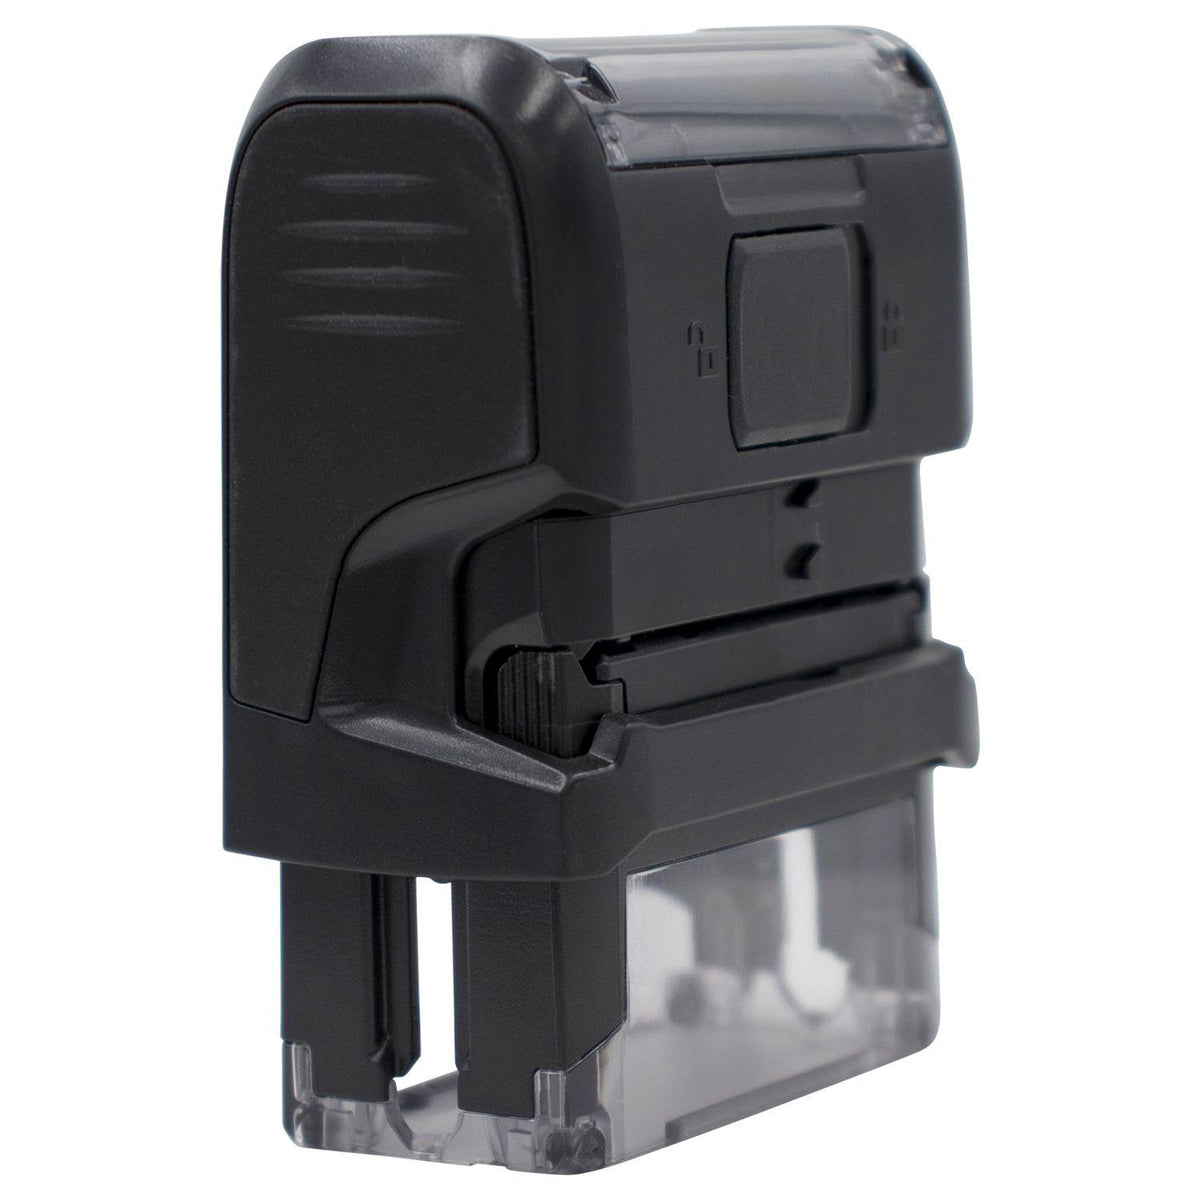 Large Self Inking Outline Copy Stamp - Engineer Seal Stamps - Brand_Trodat, Impression Size_Large, Stamp Type_Self-Inking Stamp, Type of Use_Office, Type of Use_Professional